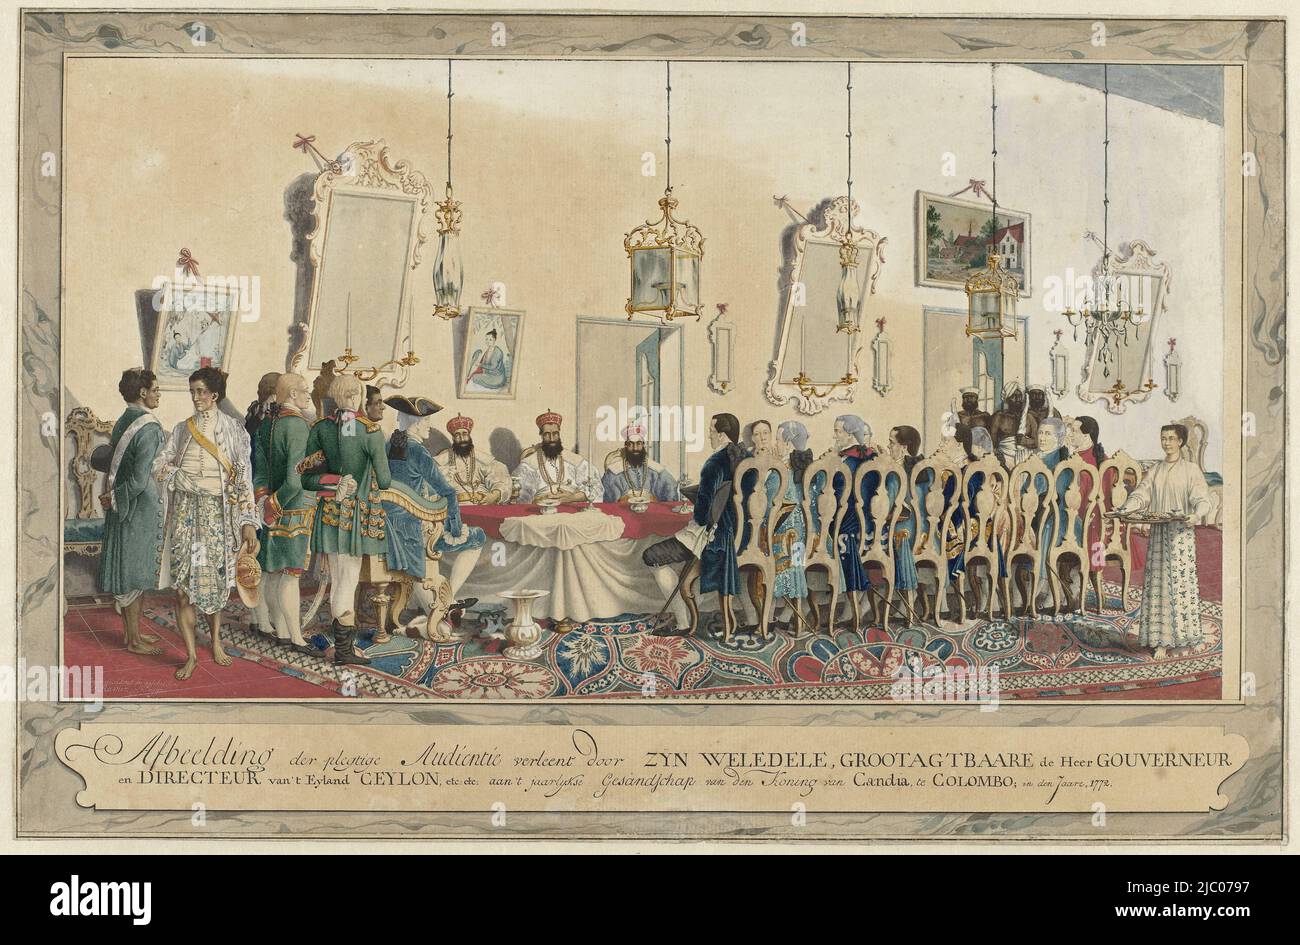 Reception of the envoys of the King of Kandy by Governor Imam Falck in the Great Reception Room of the Governor's House in Colombo. Bottom left: after Life Ticked and Painted / by C. F. Reimer Surgeon. Below, in cartouche: Image of the Solemn Audience granted by ZYN WELEDELE, GREAT Mister GOUVERNEUR / and DIRECTOR of 't Eyland CEYLON, etc: etc: to 't jaarlykse Gesandschap van den Koning van Candia, at COLOMBO, in den Jaare, 1772., Reception of the envoys of the king of Kandy by governor Imam Falck., draughtsman: Carel Frederik Reimer, (mentioned on object), 1772, paper, brush, h 280 mm × w 430 Stock Photo